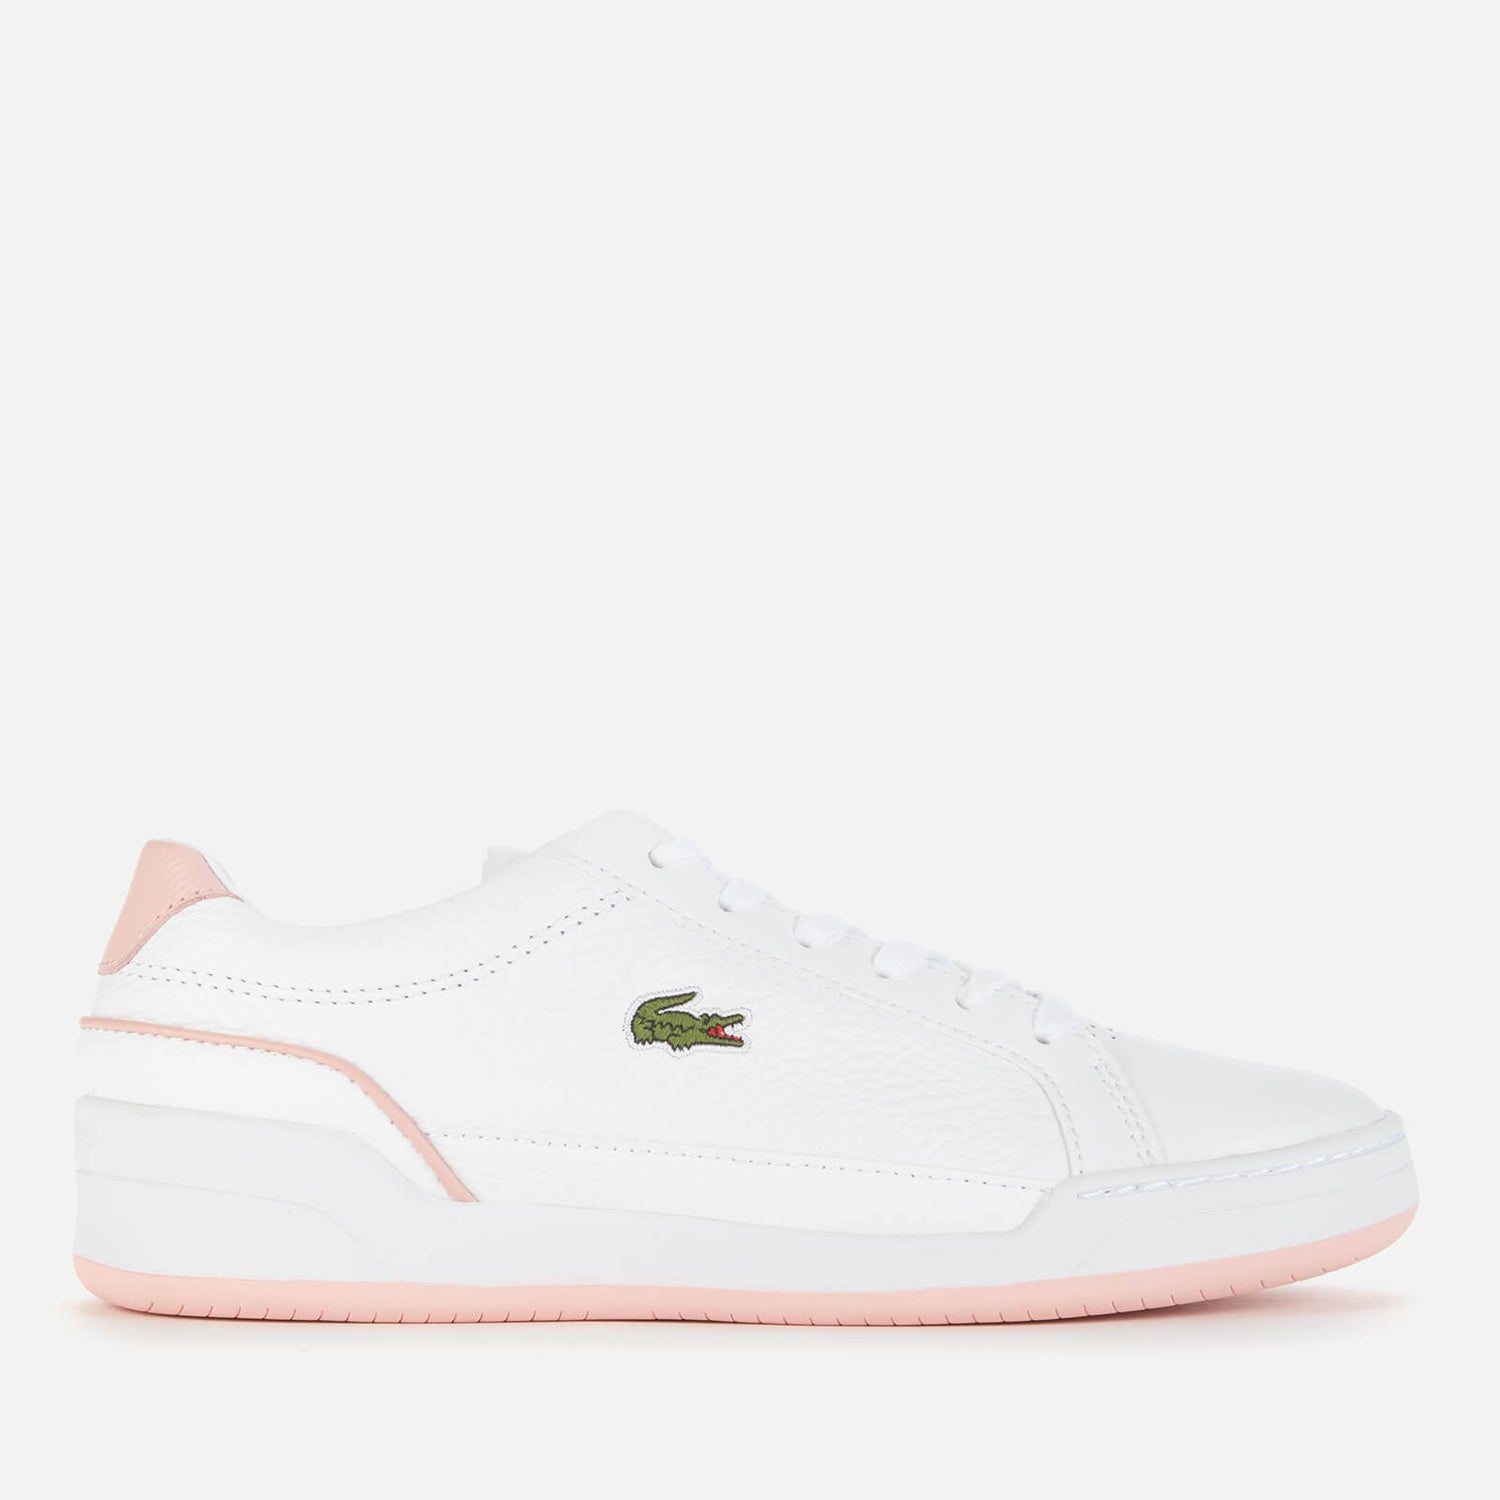 Lacoste Women's Challenge 0721 1 Leather Cupsole Trainers - White/Light Pink